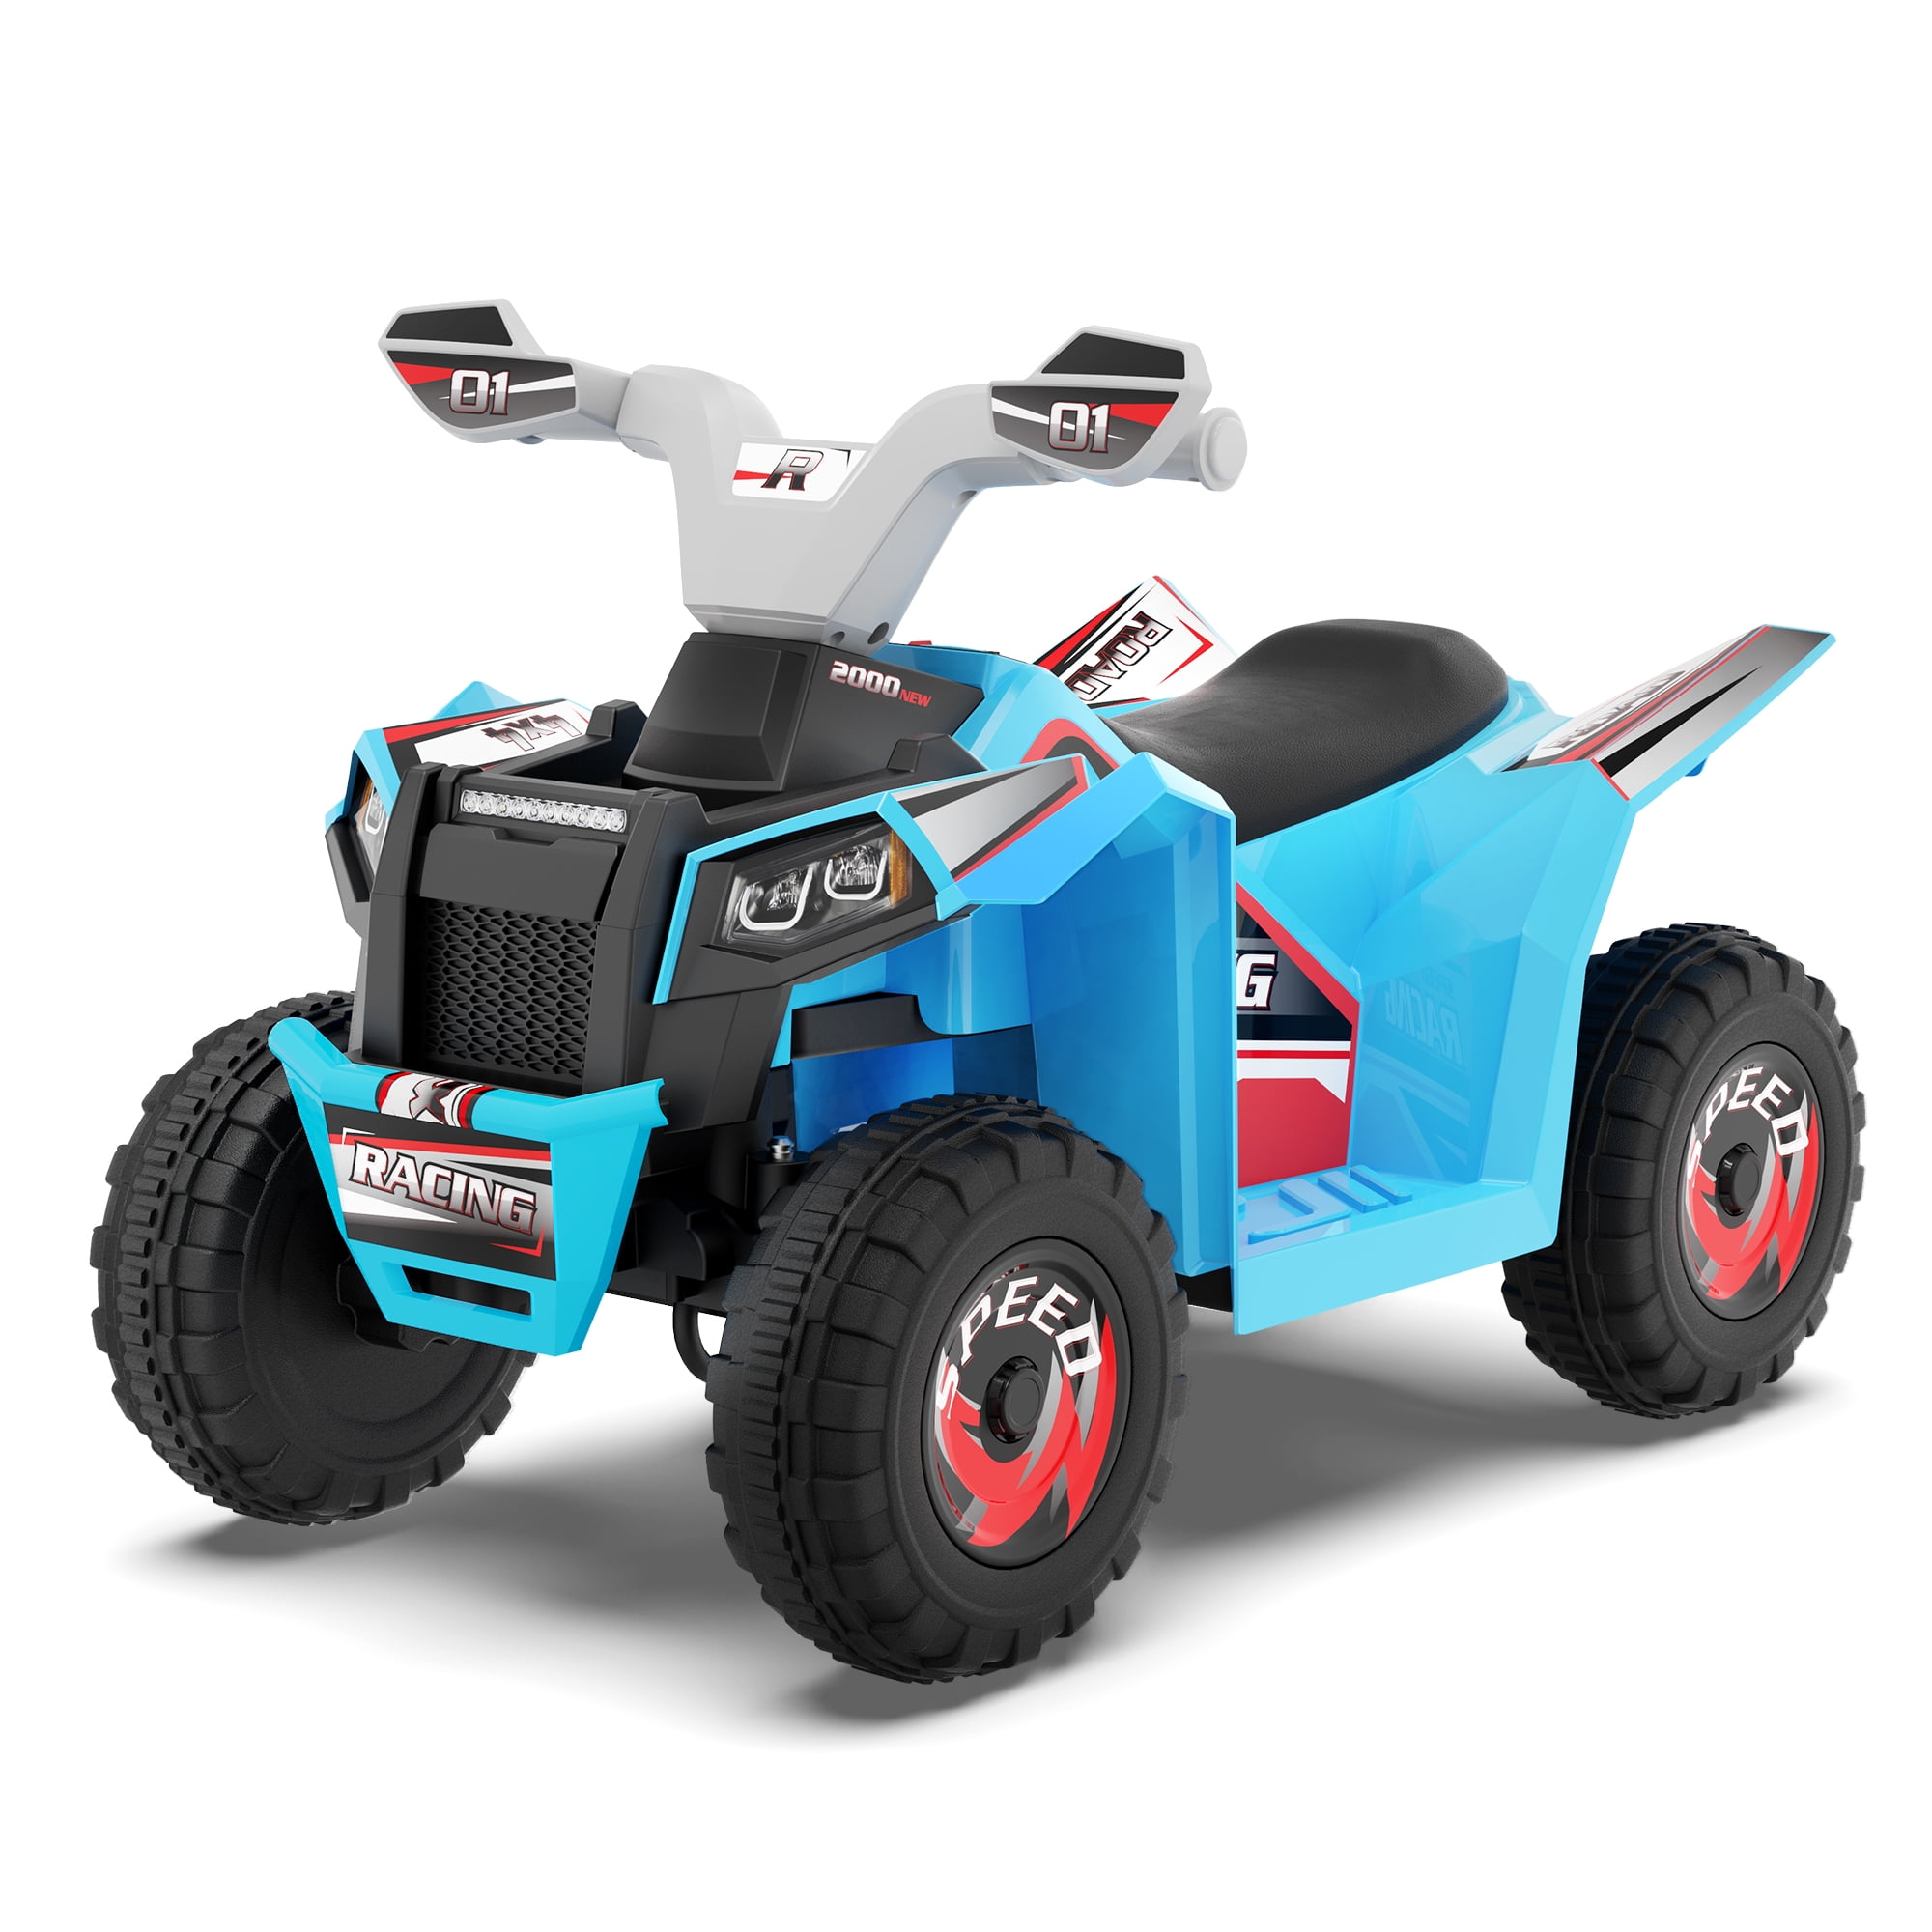 TOKTOO 6V 7Ah Powered Ride-on ATV for Toddler Aged 1-3 Year Old, Electric 4-Wheeler Toy Car w/ Horn, Music Player, Quad Bike-Blue - image 1 of 12